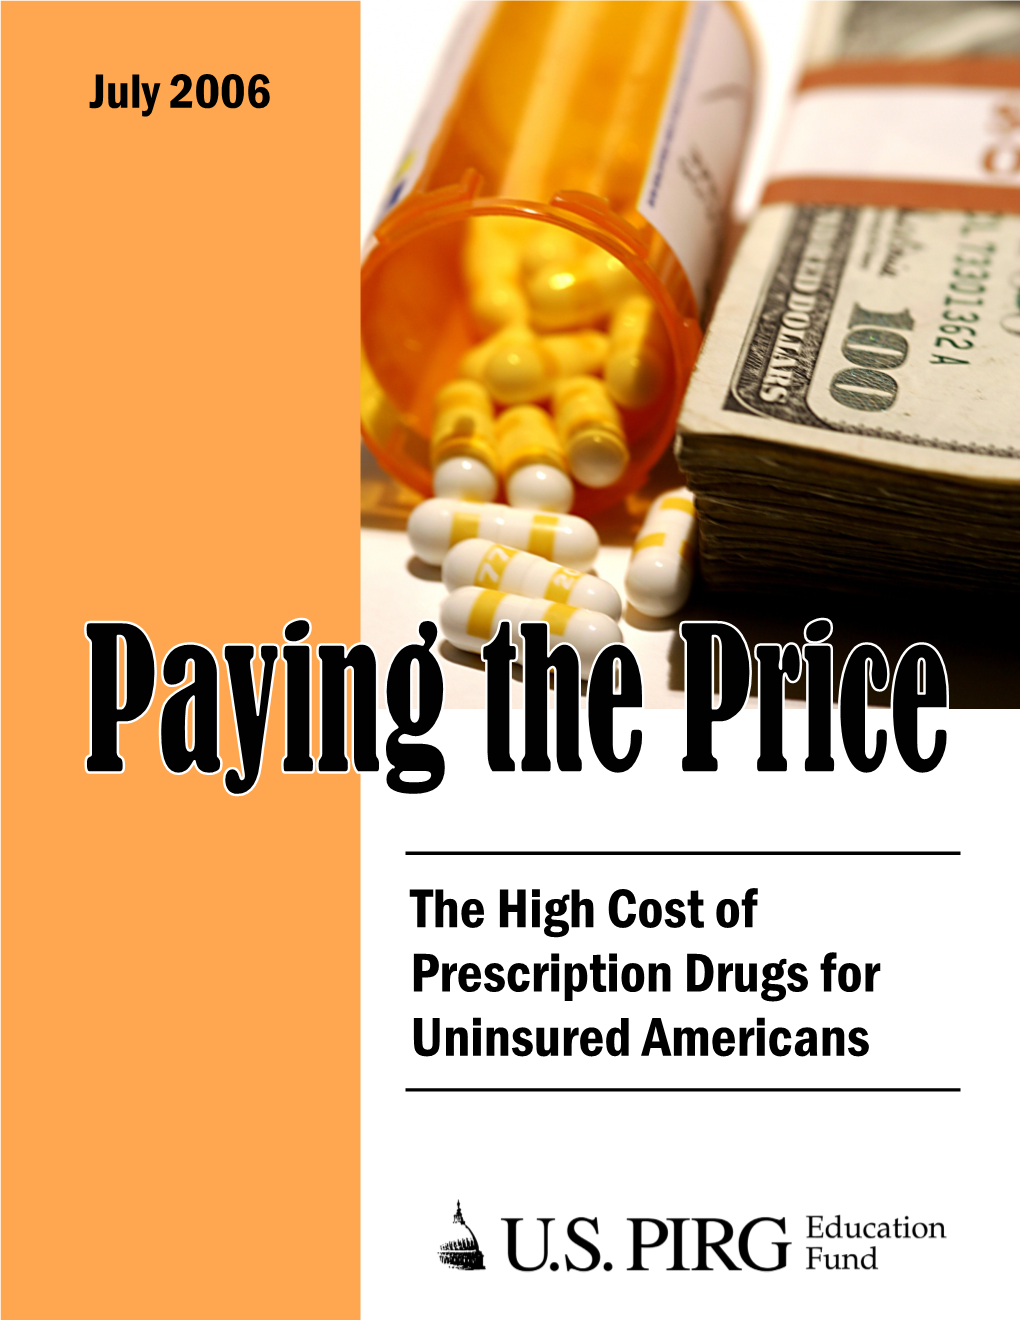 The High Cost of Prescription Drugs for Uninsured Americans